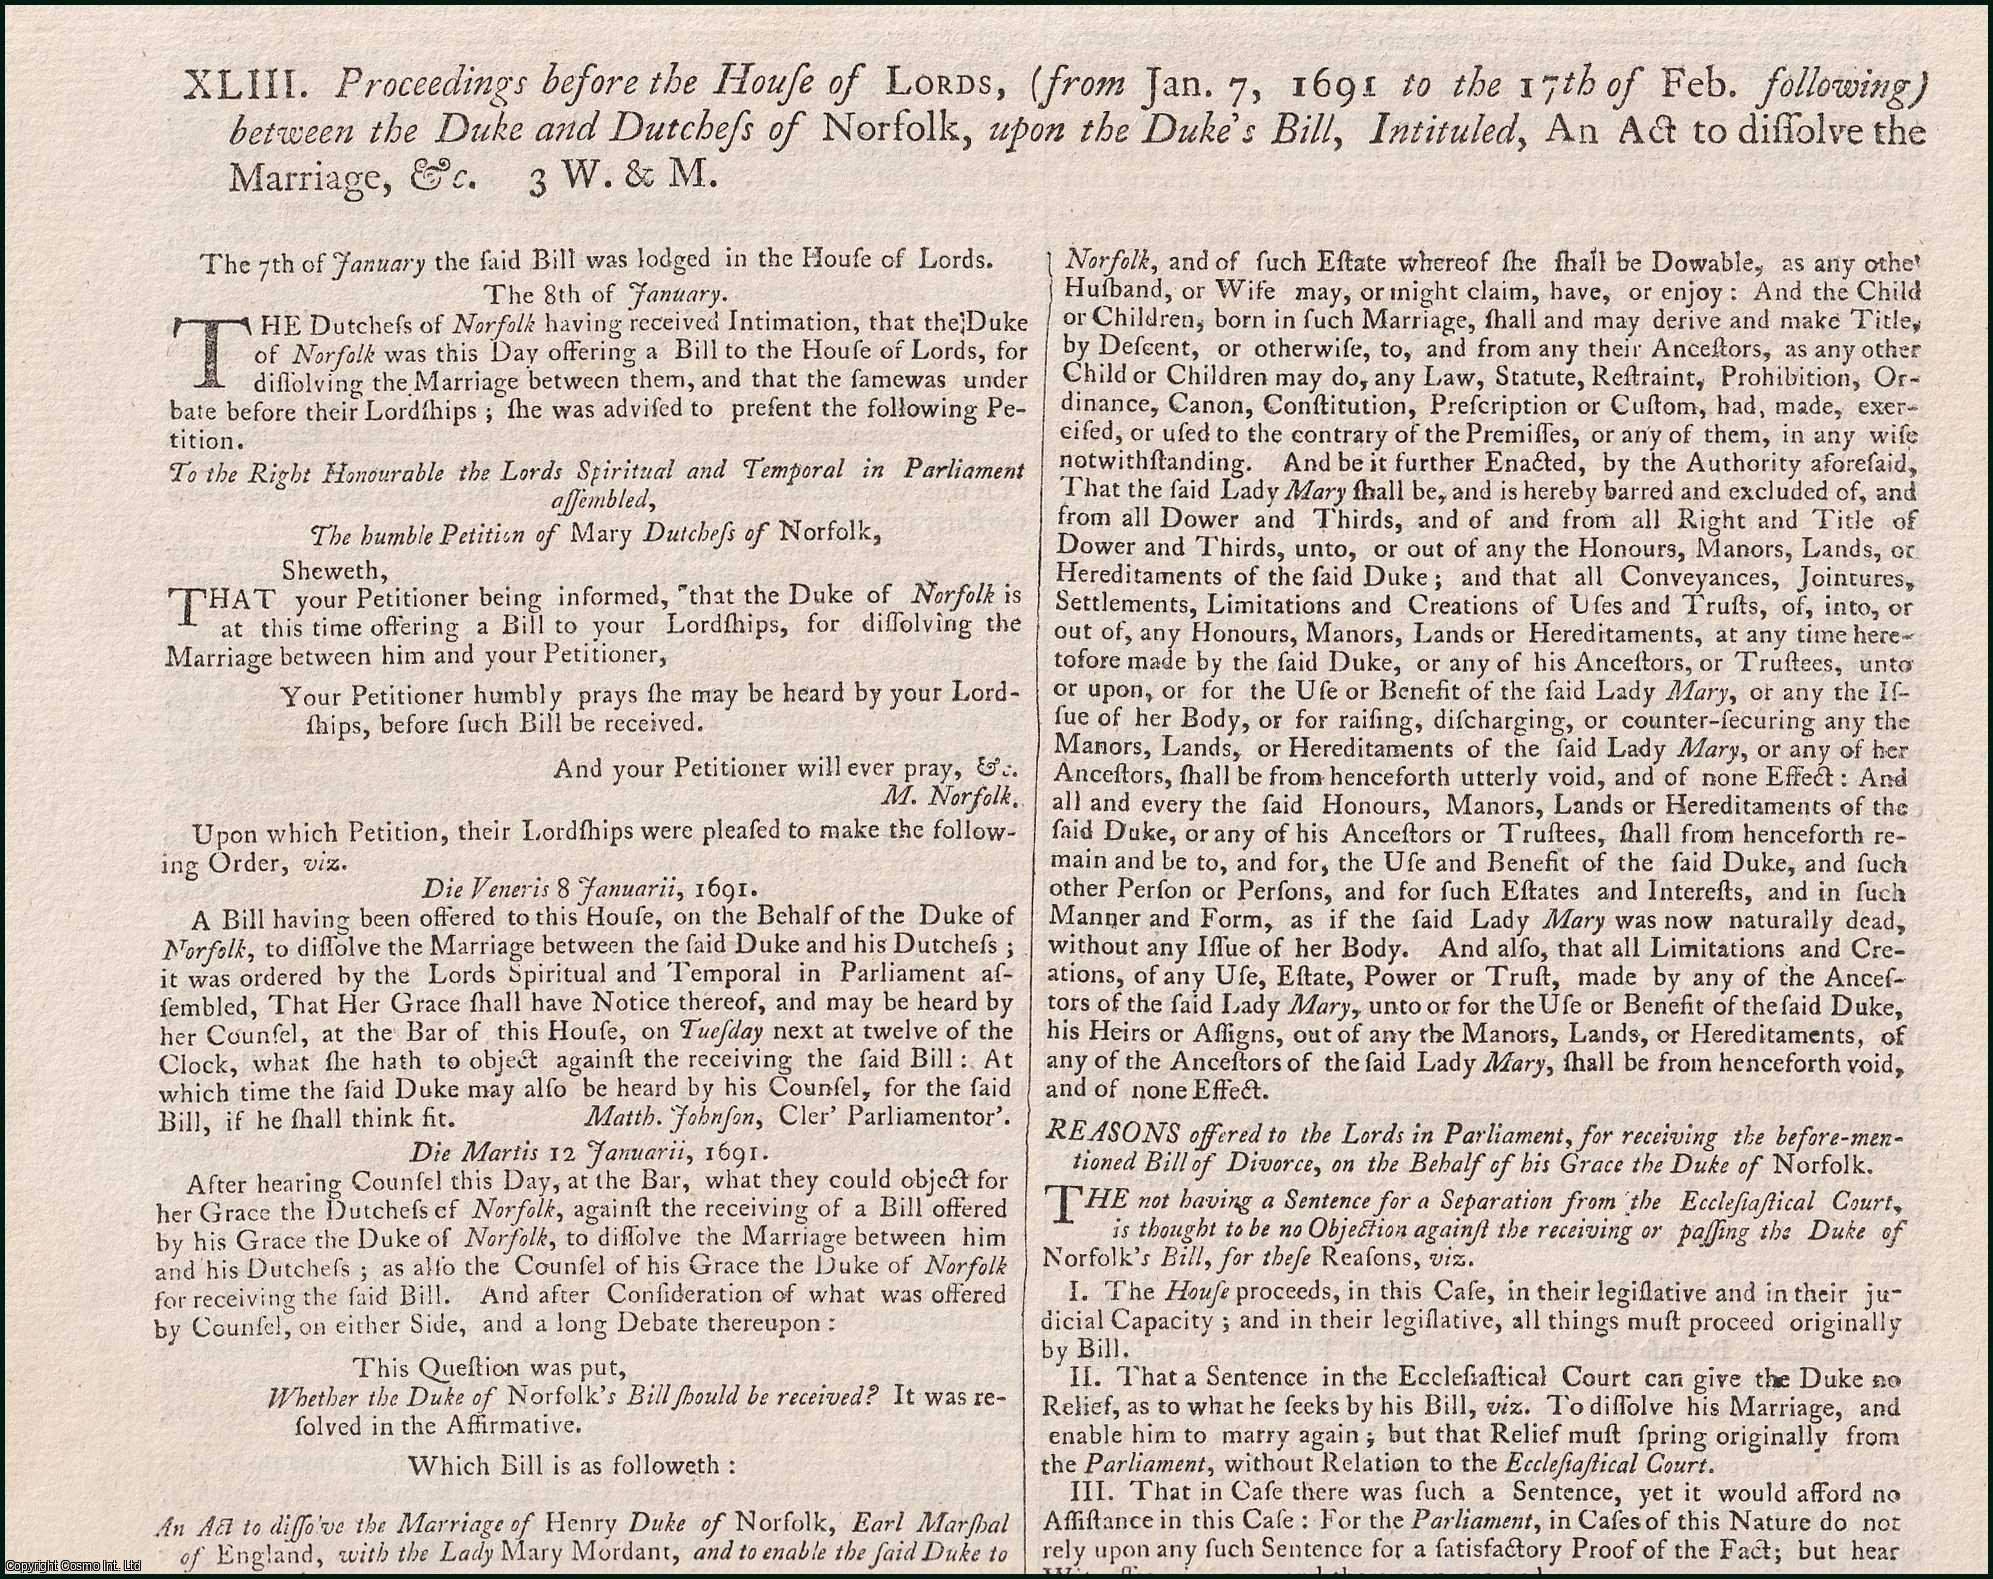 [Trial]. - Proceedings before the House of Lords. (from Jan. 7, 1691 to the 17th of Feb. following) between the Duke and Dutchess of Norfolk, upon the Duke's Bill, Intituled, An Act to dissolve the Marriage, &c. An original report from the Collected State Trials.